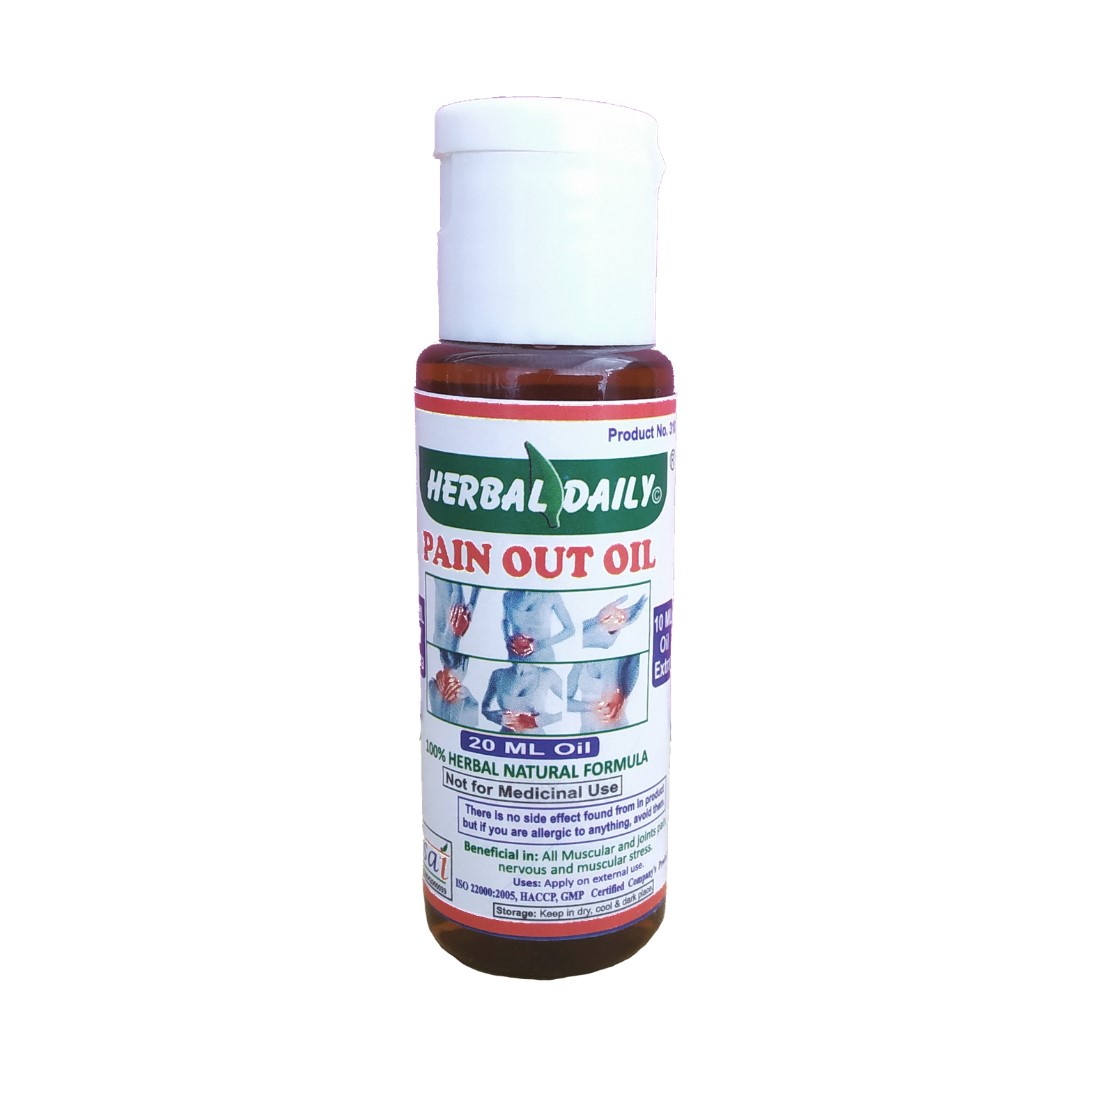 Pain Out Oil